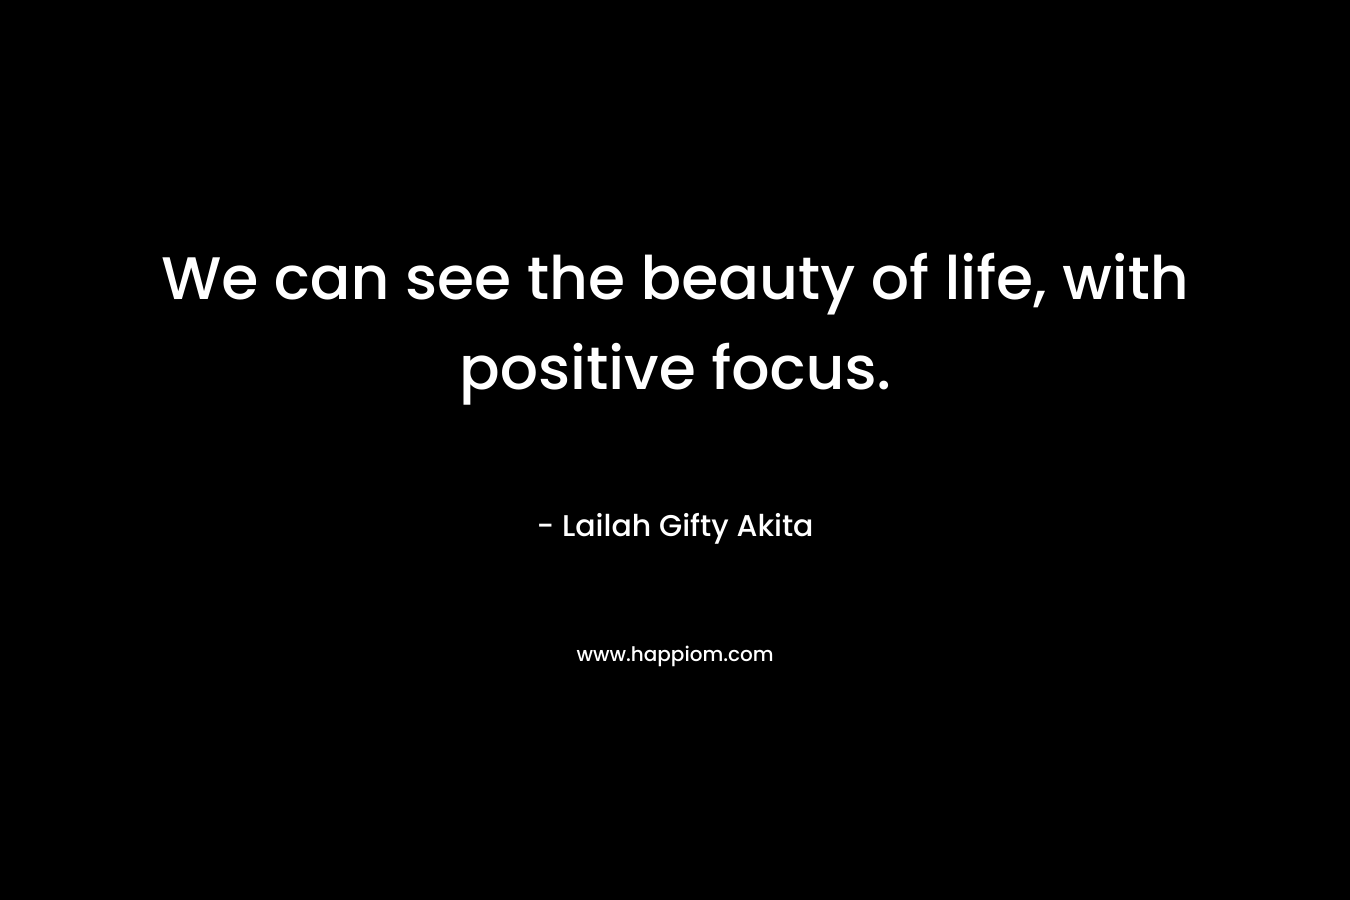 We can see the beauty of life, with positive focus.